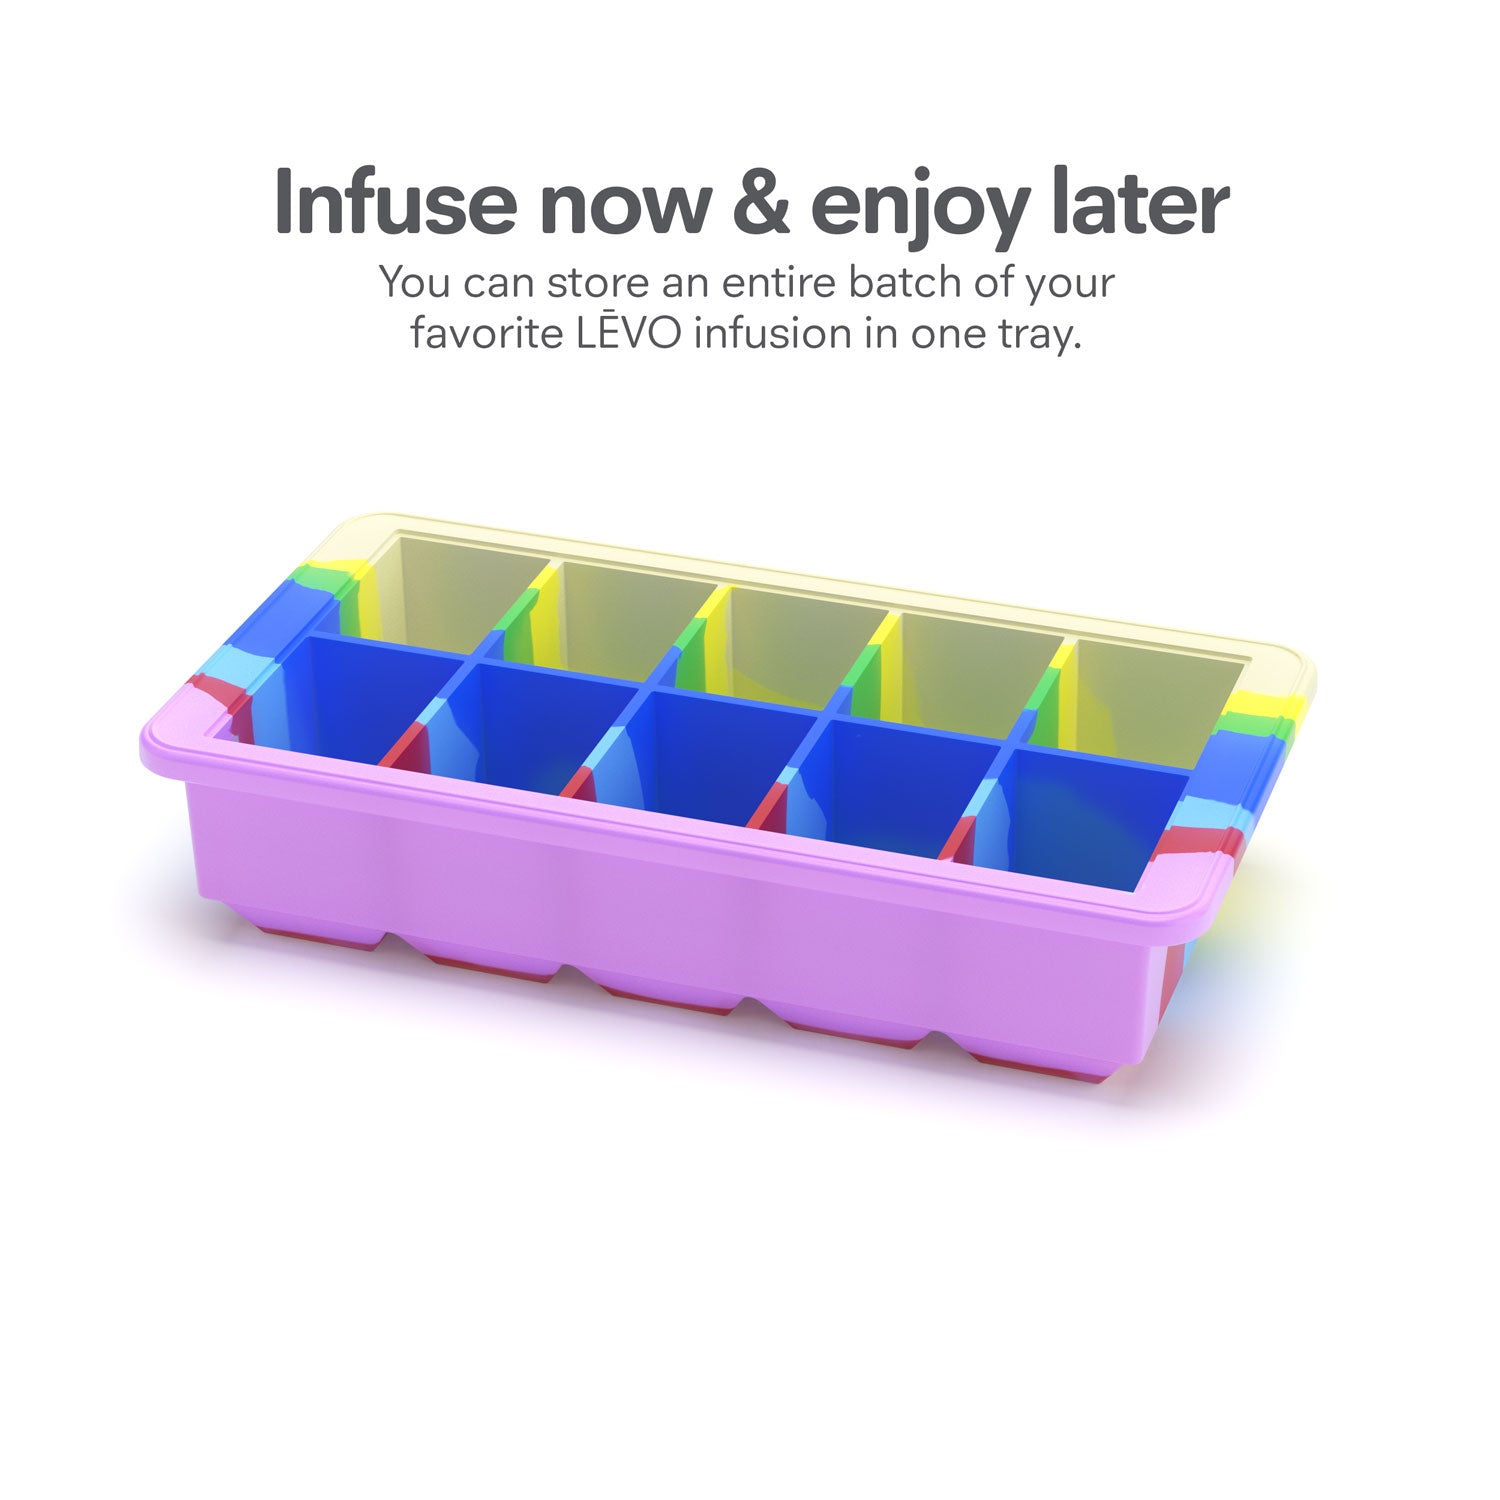 Infuse now and enjoy later. You can store an entire batch of your favorite LEVO infusion in one tray.